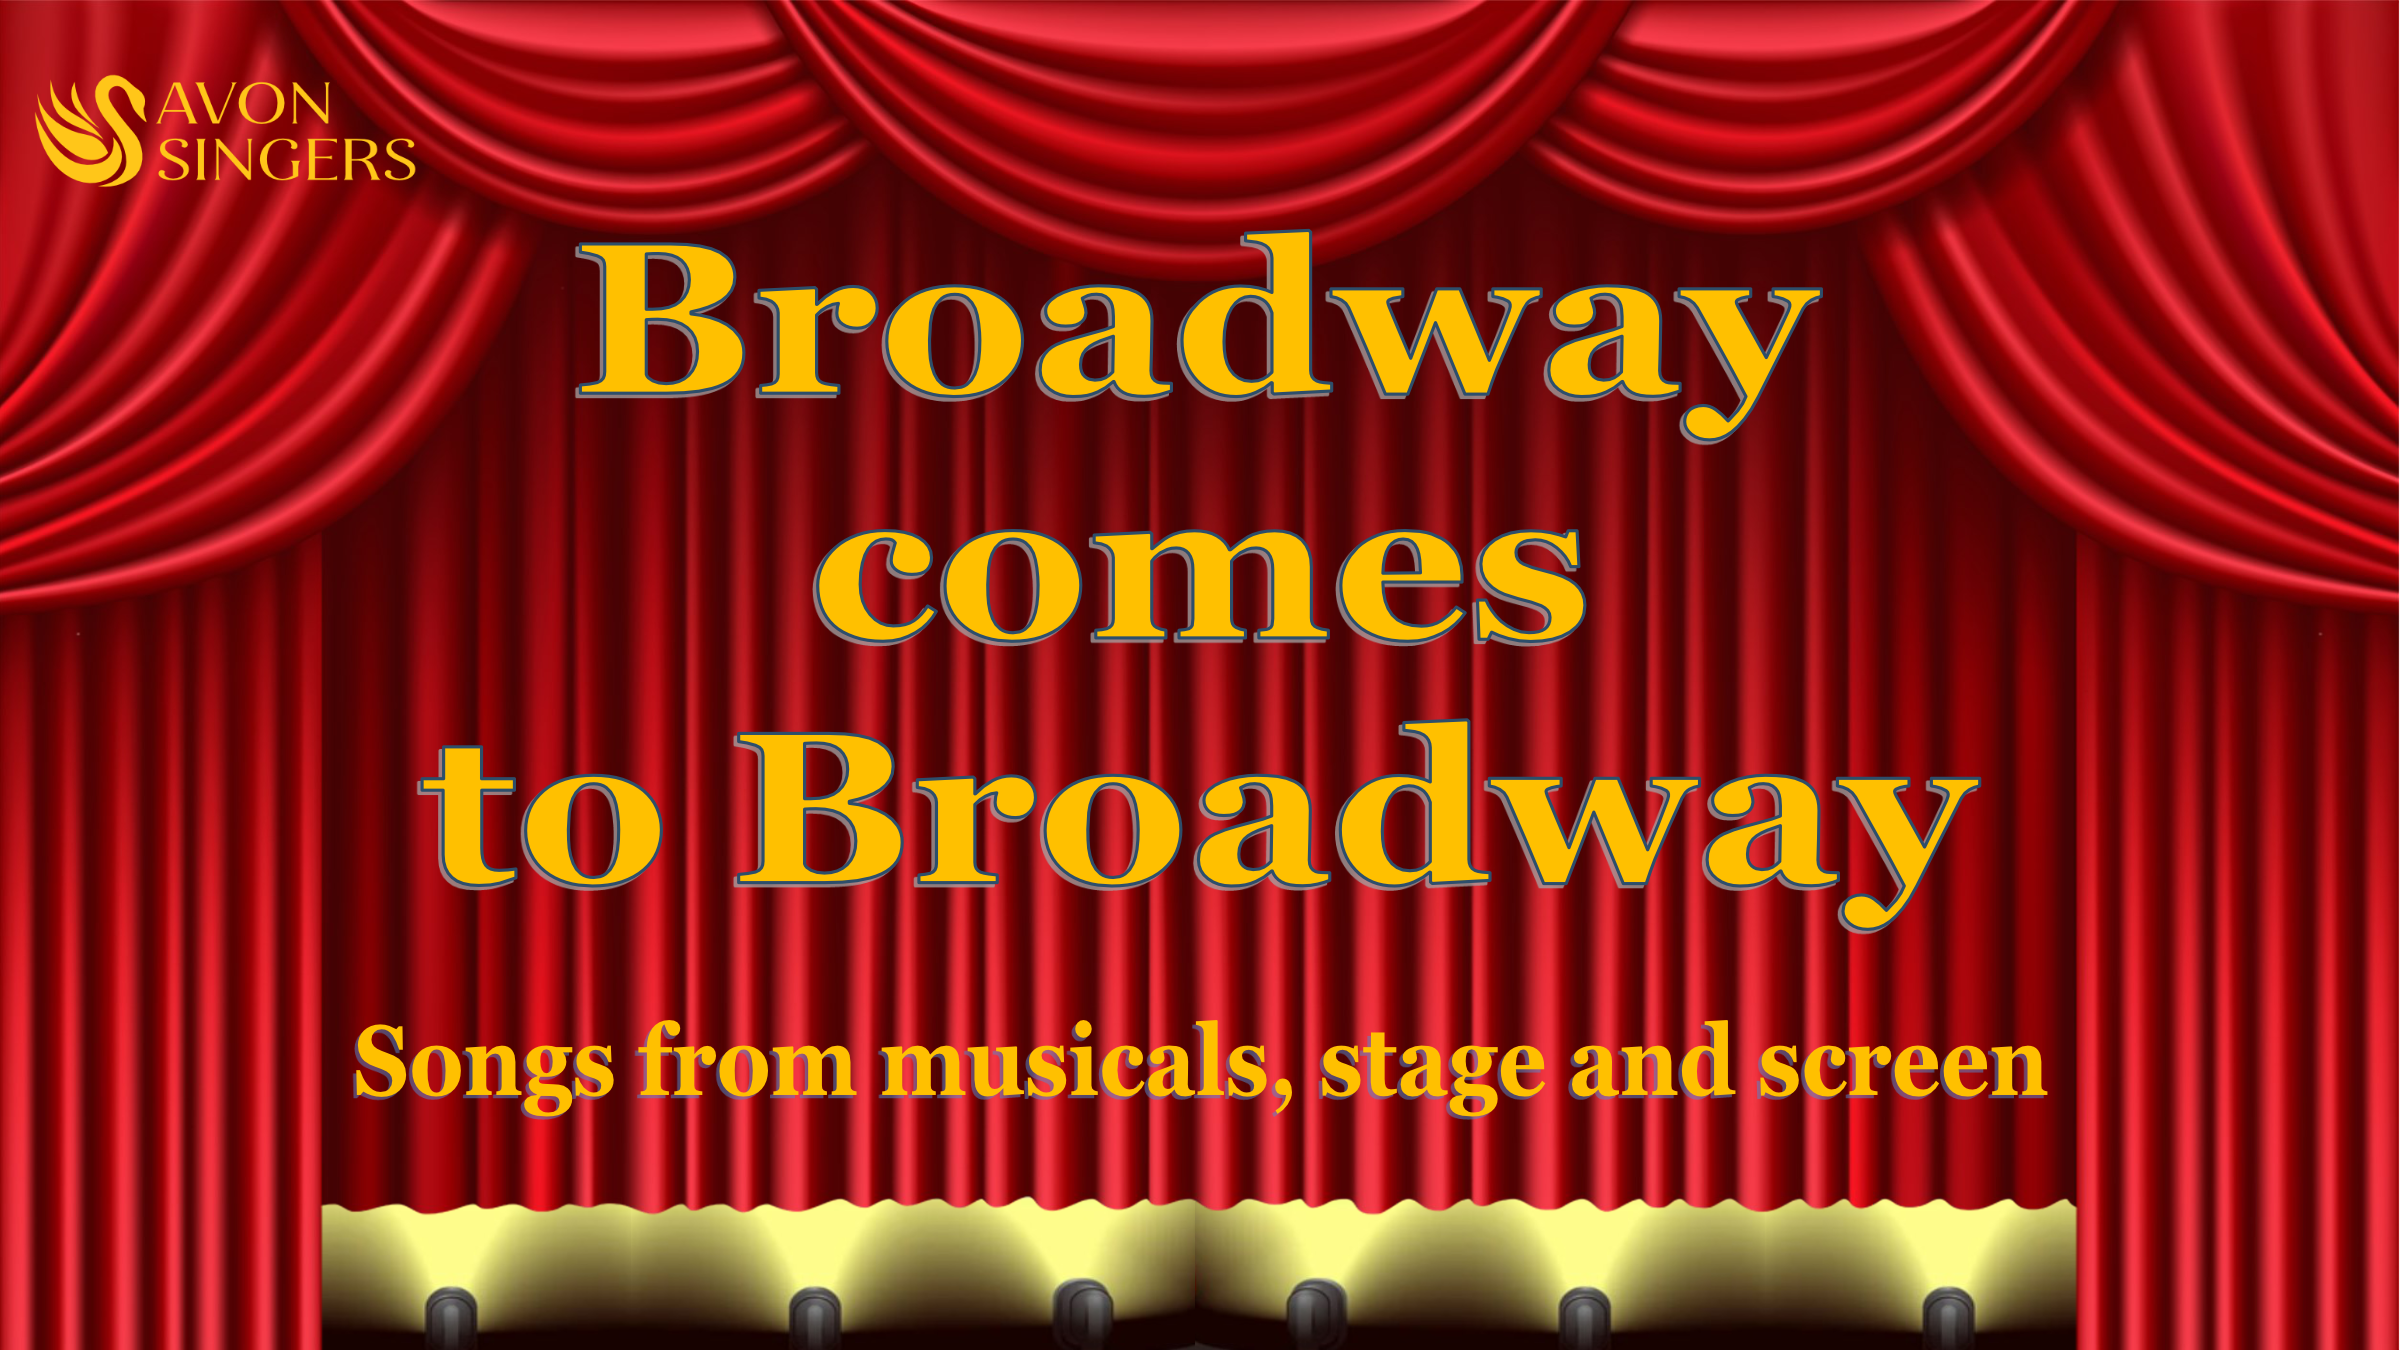 Broadway comes to Broadway